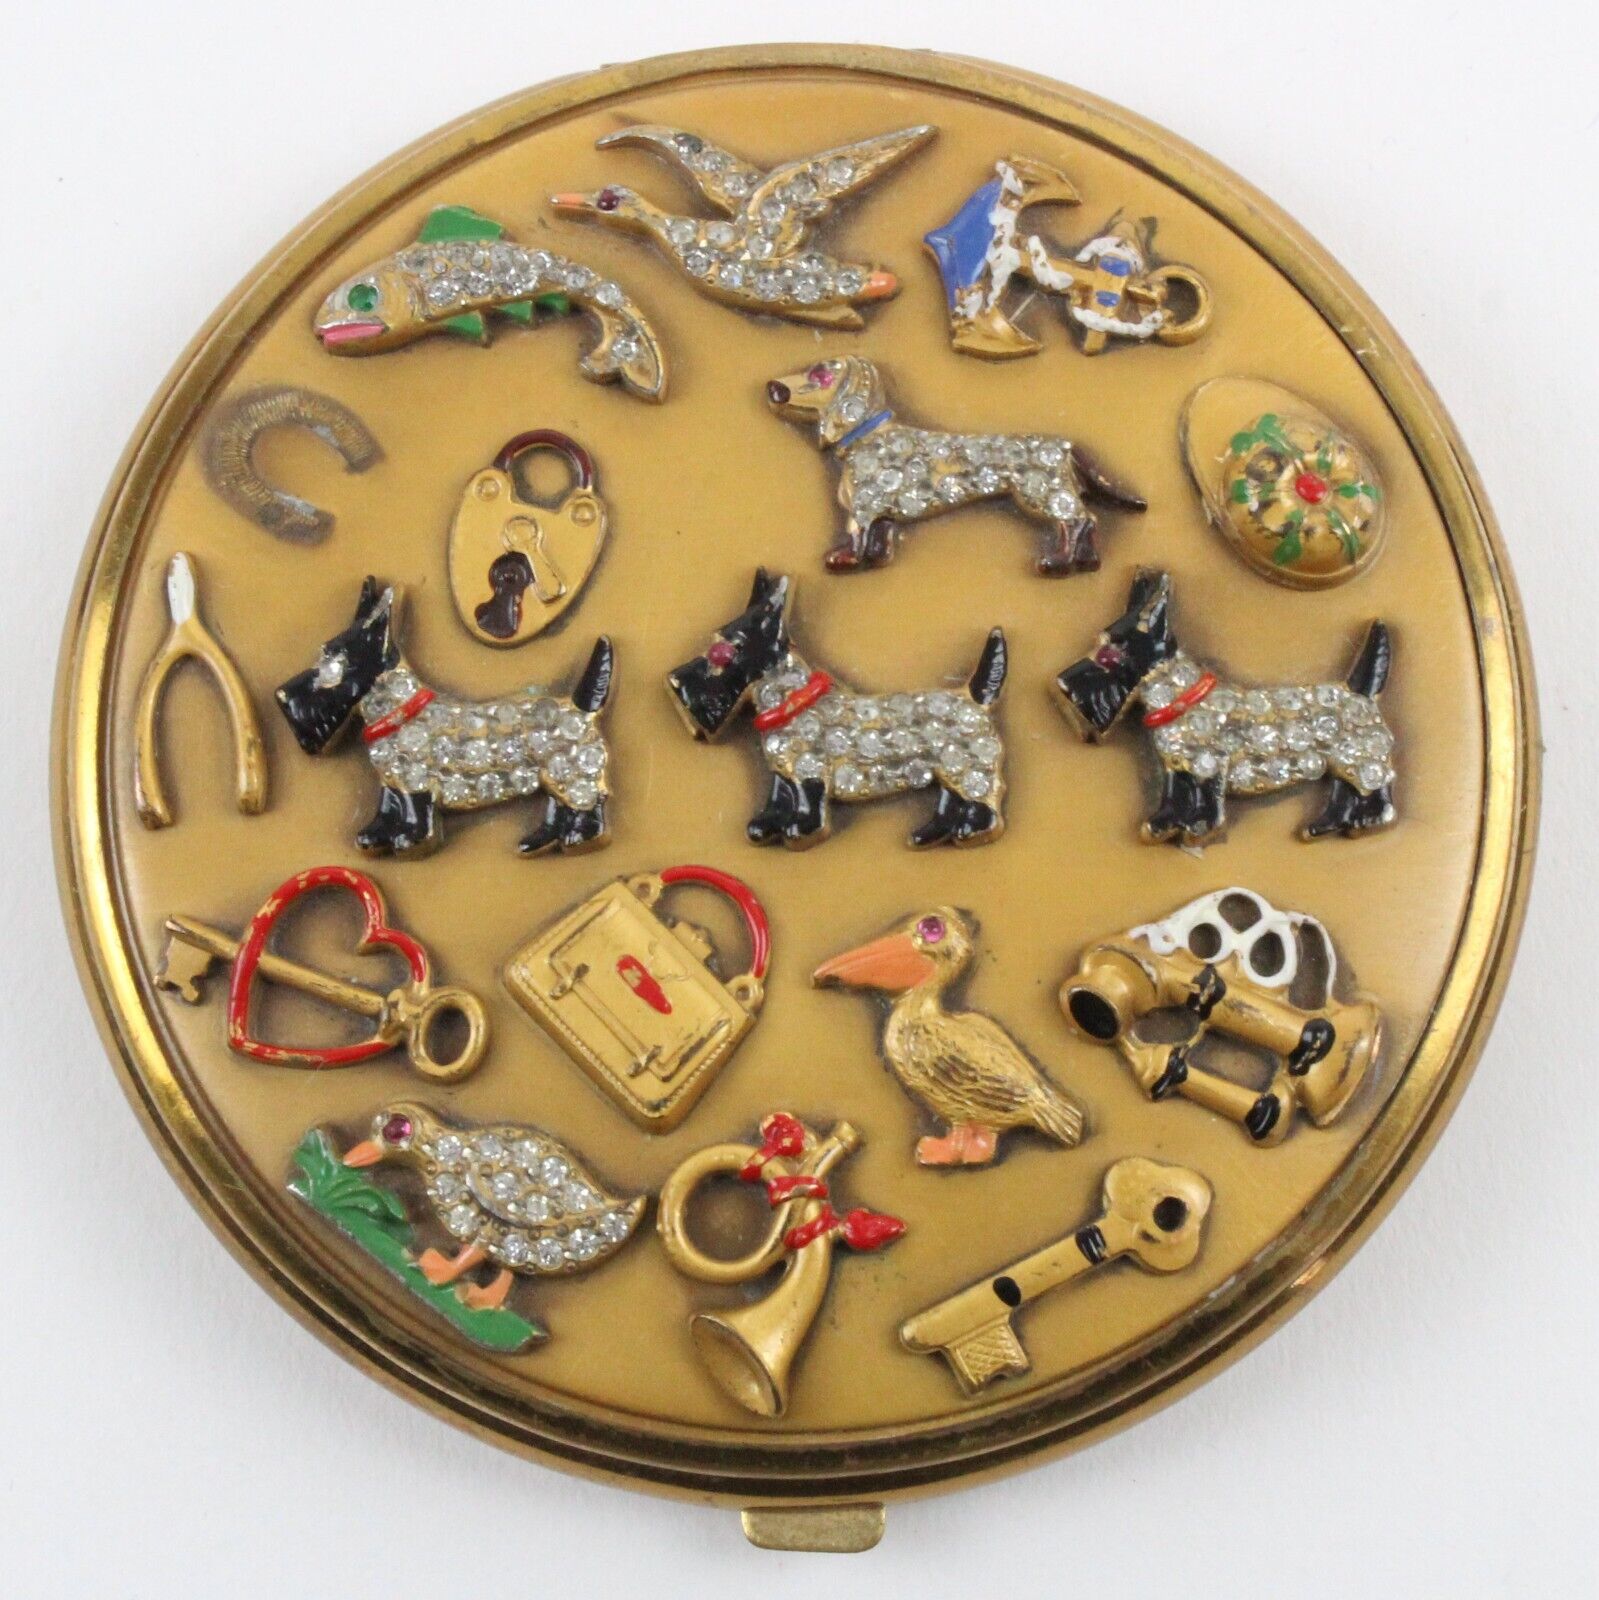 Foster Lucky Charms Compact Mirror 17 charms Vintage 1930-40s Rhinestone Enamel